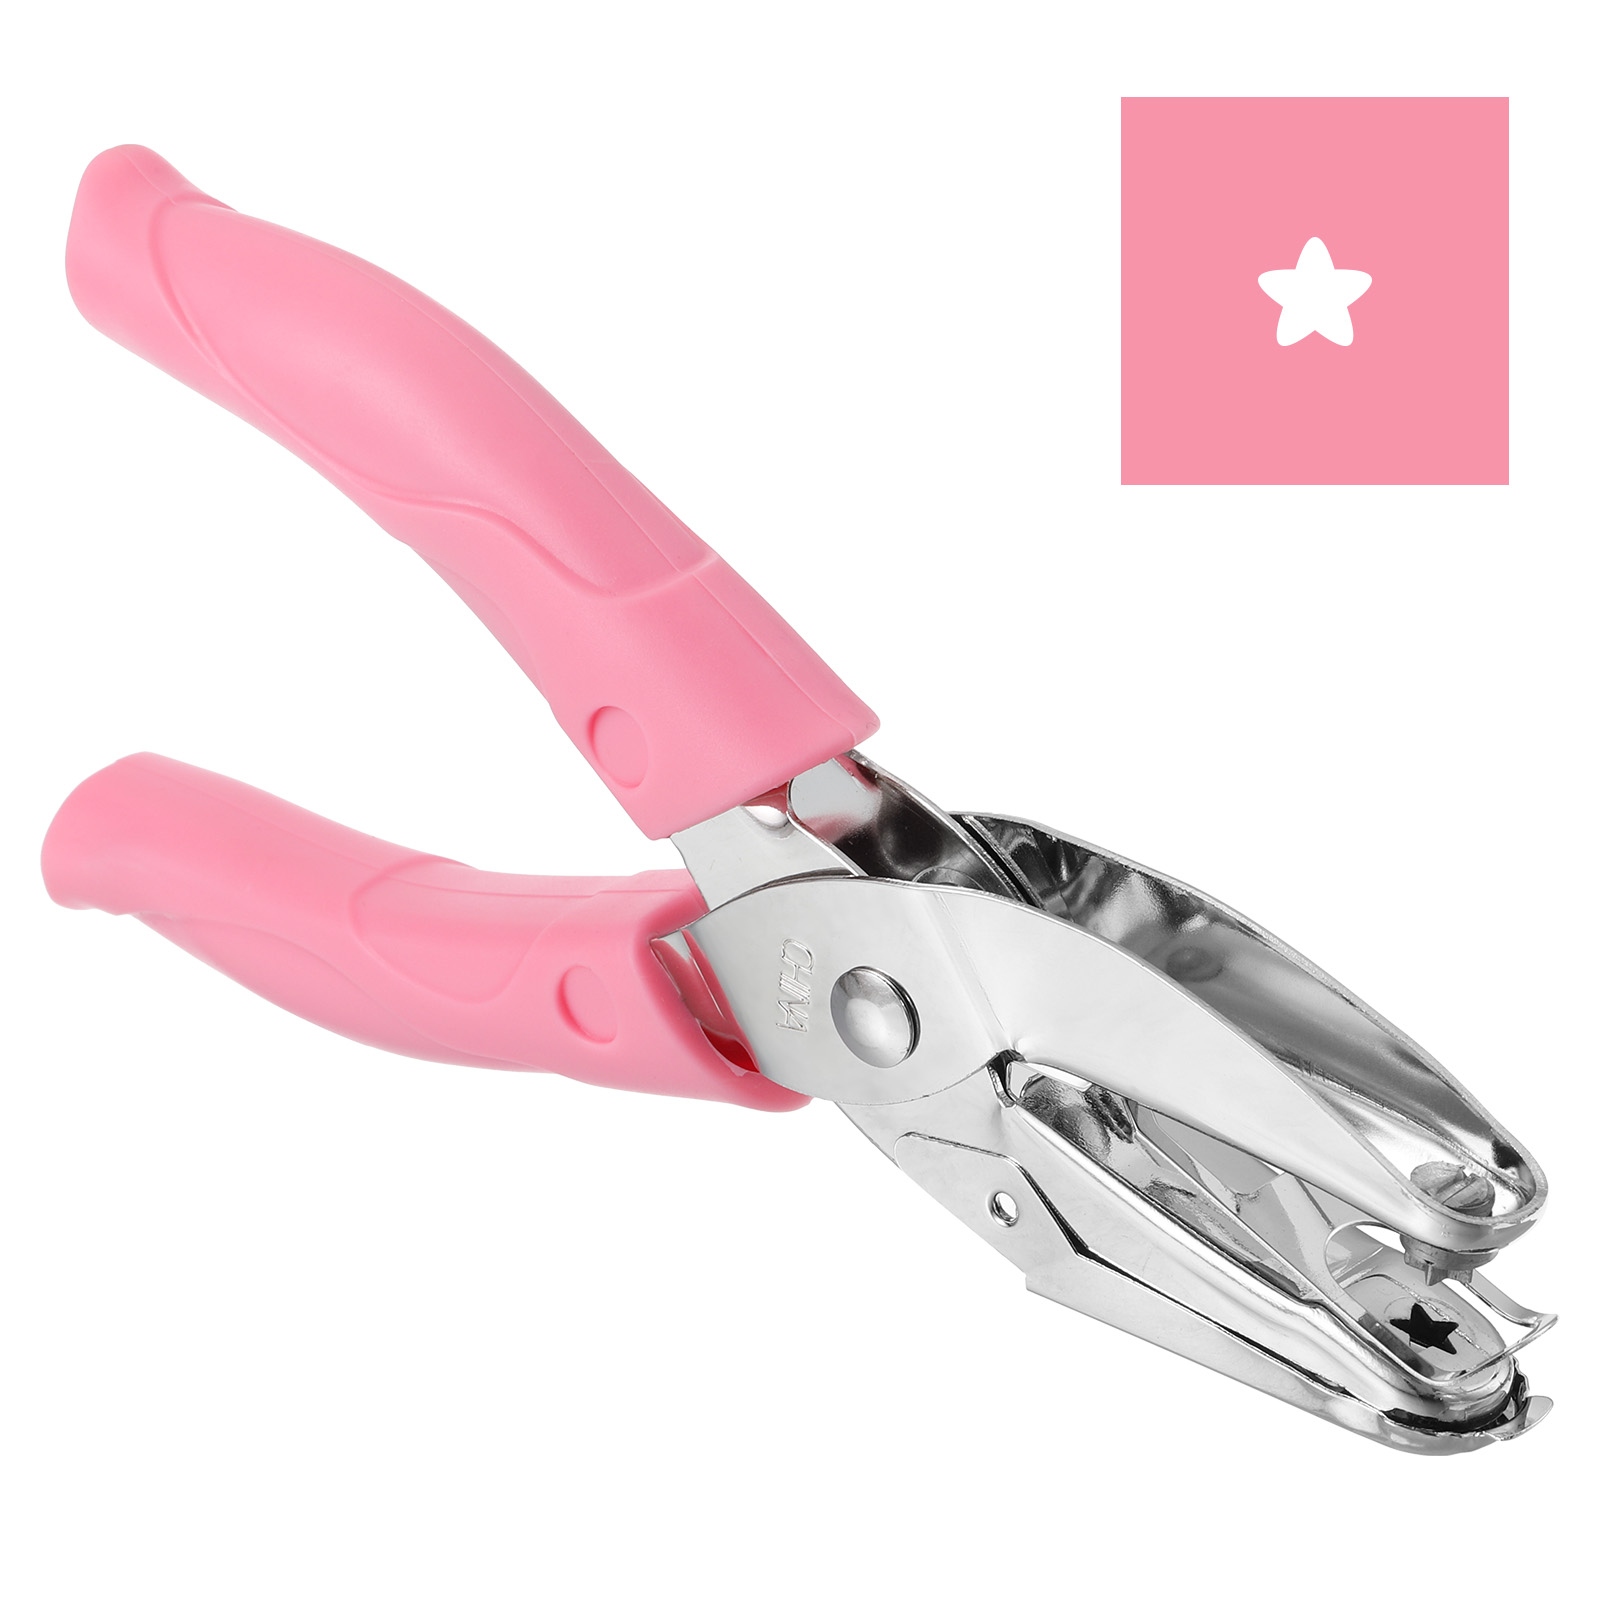 0.2 Single Hole Punch Handheld Hole Puncher Star Hole Paper Puncher, Pink